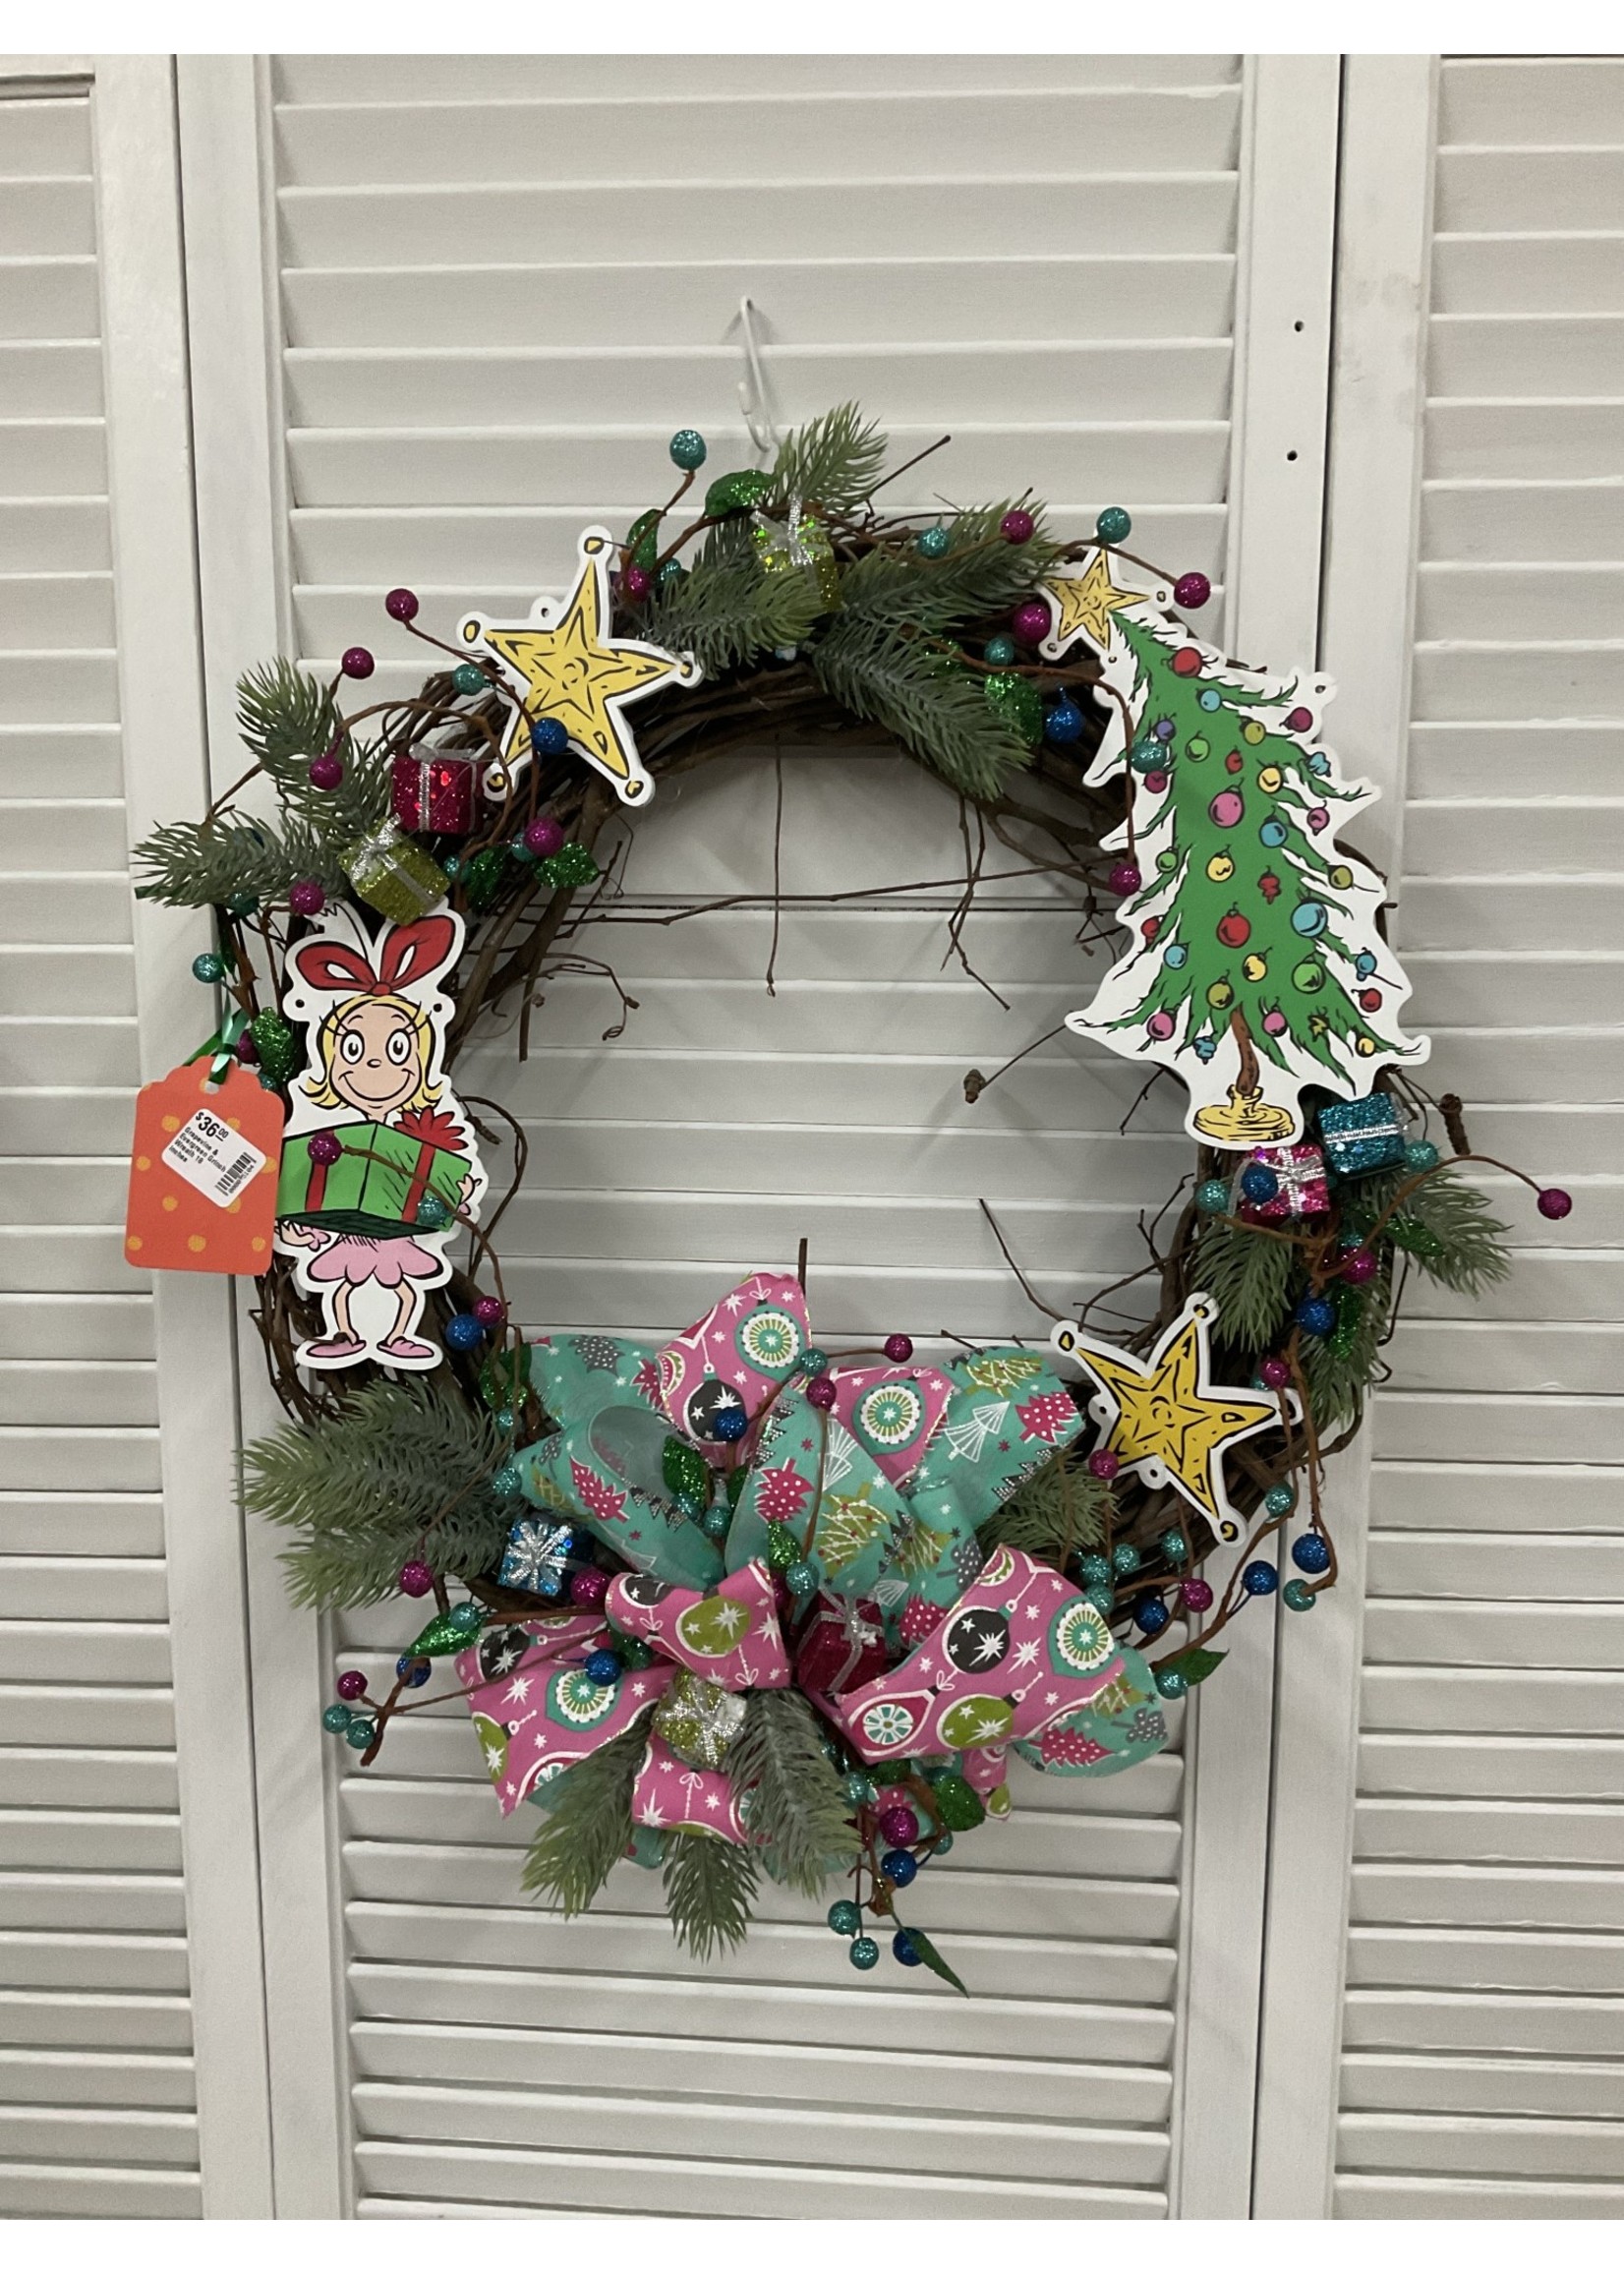 My New Favorite Thing Wreath Grapevine with Evergreen "Grinch" Theme 18 inches